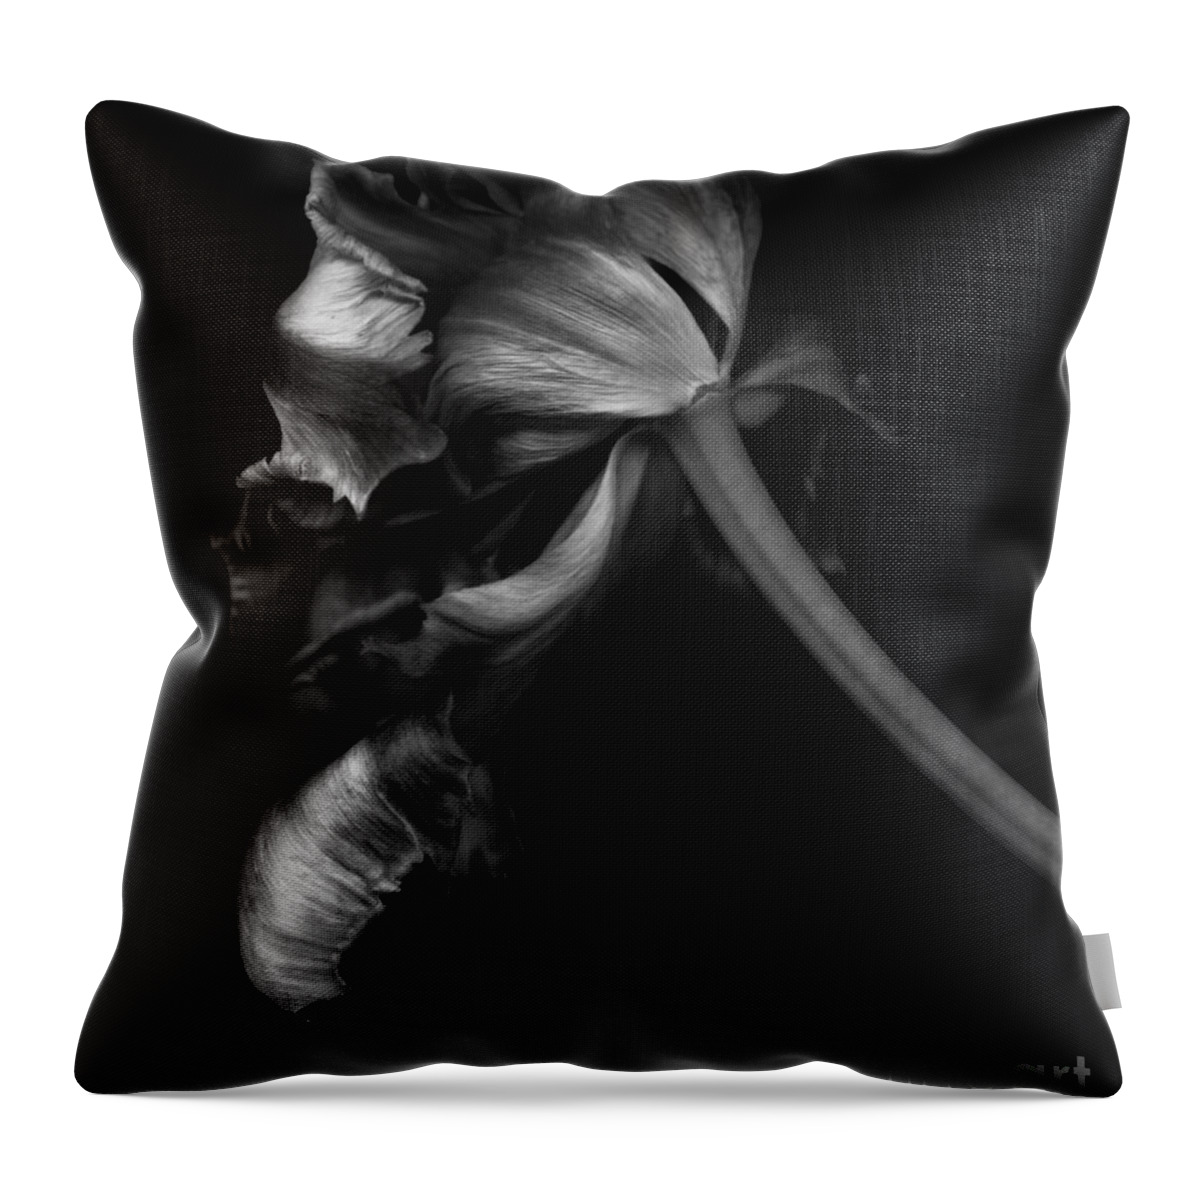 Age Throw Pillow featuring the photograph Dying Beauty by Oscar Gutierrez